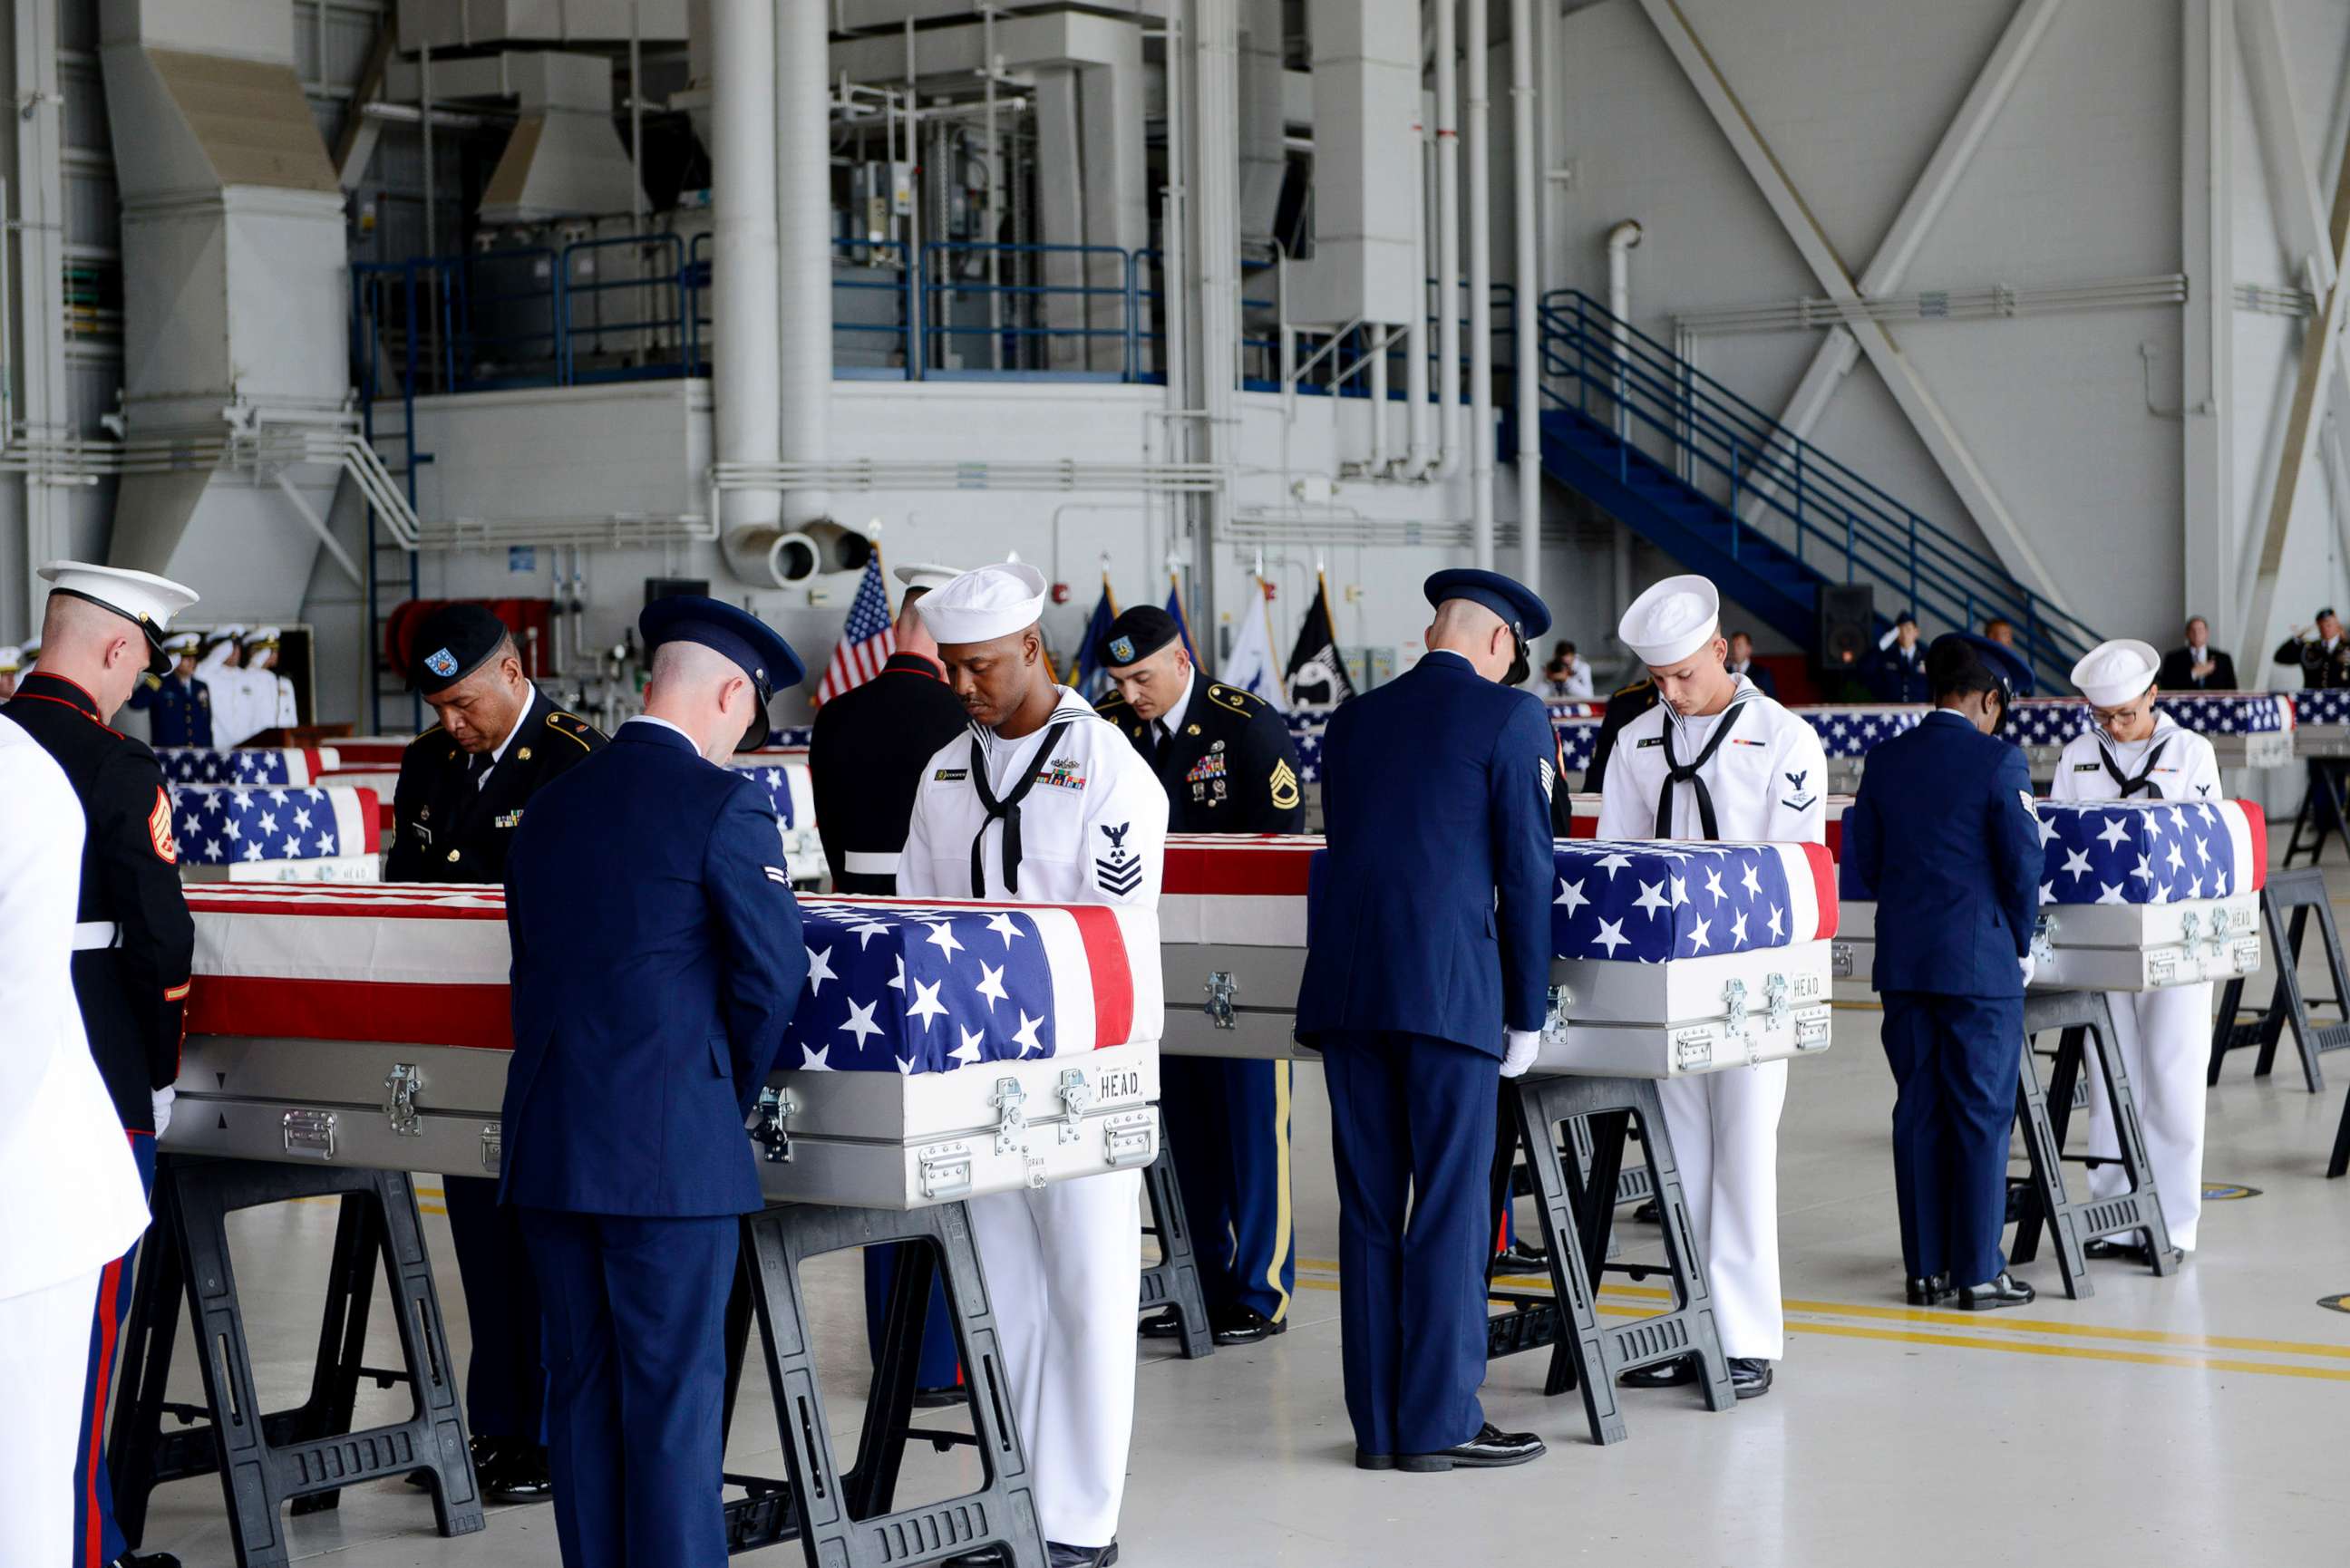 Remains of US soldiers killed in Korean War arrive in Hawaii - ABC News